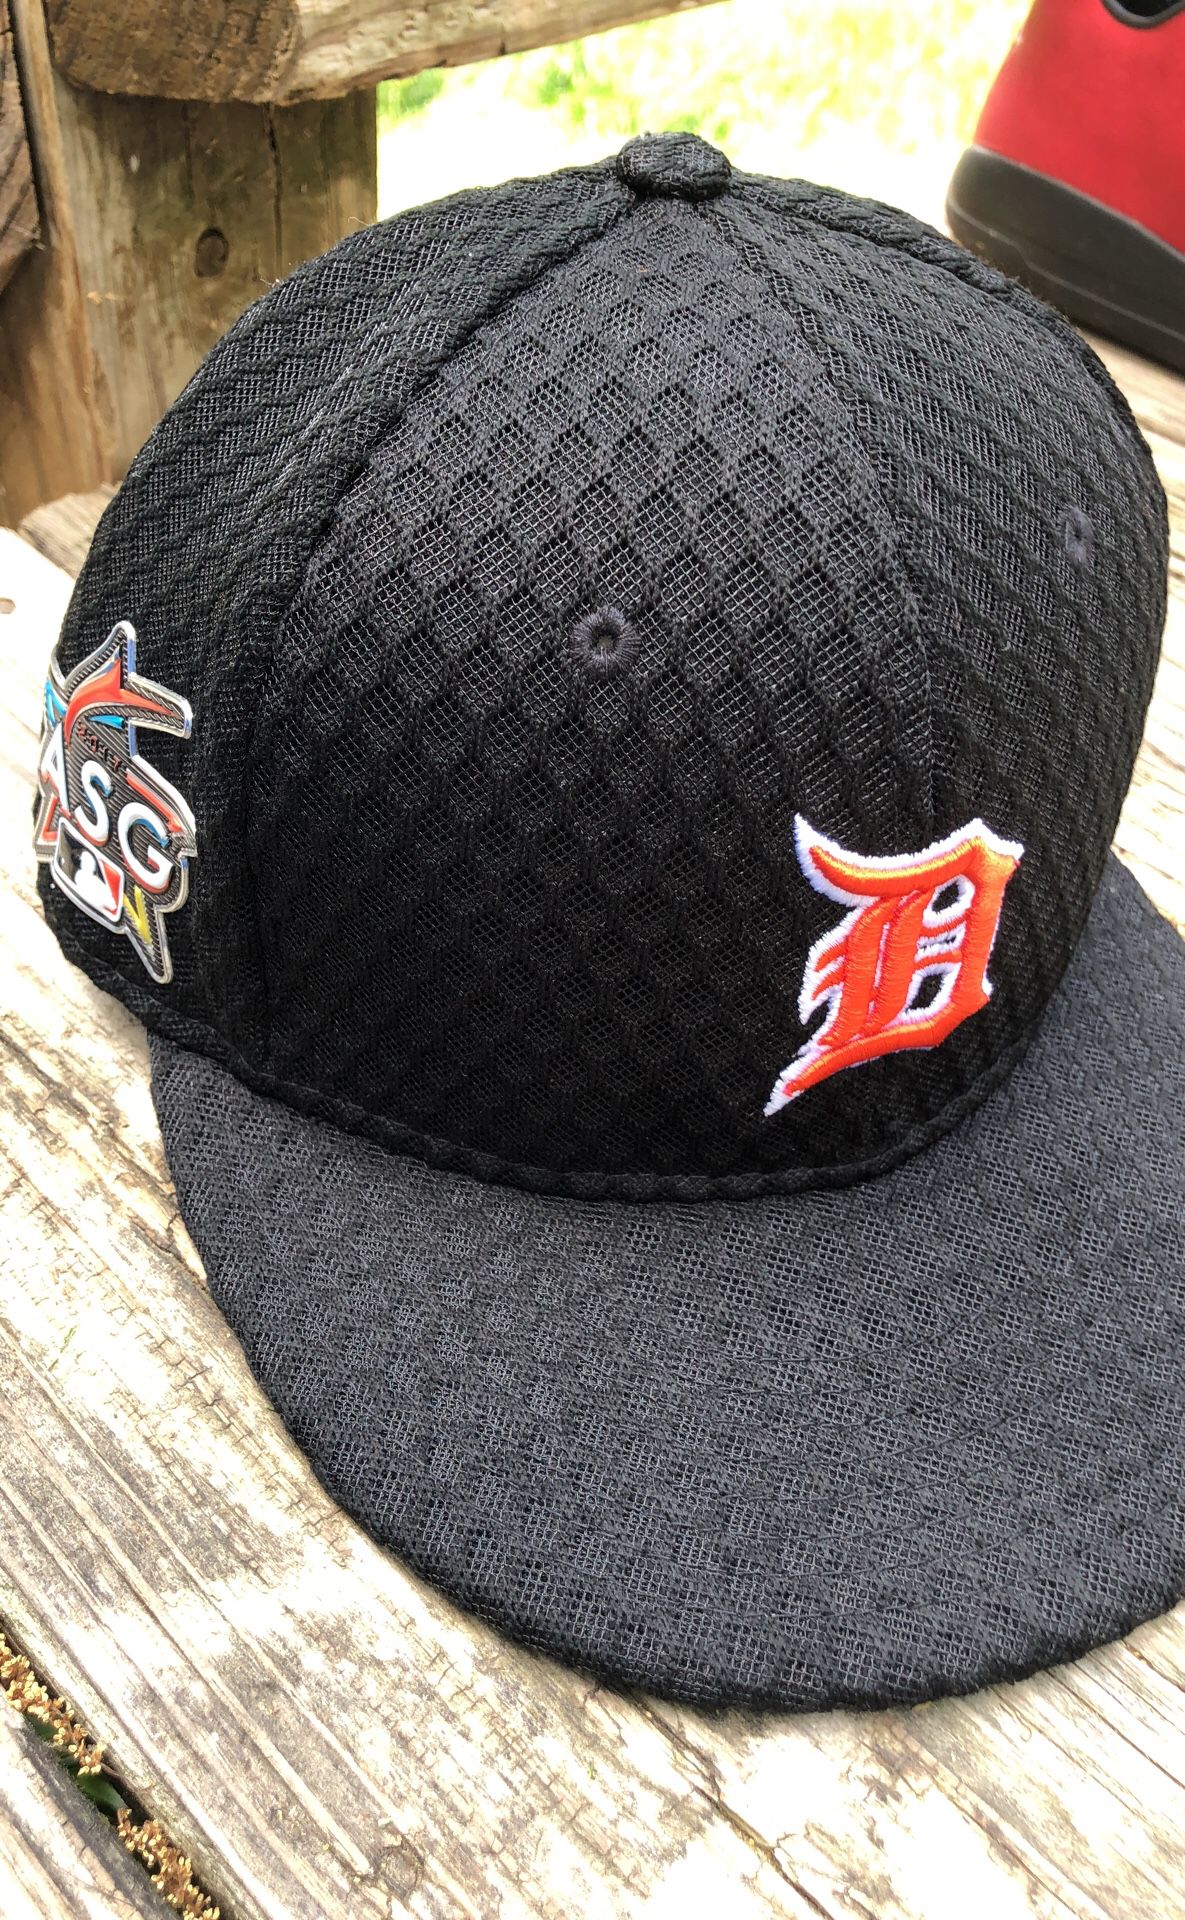 Detroit Tigers All Star Game baseball hat